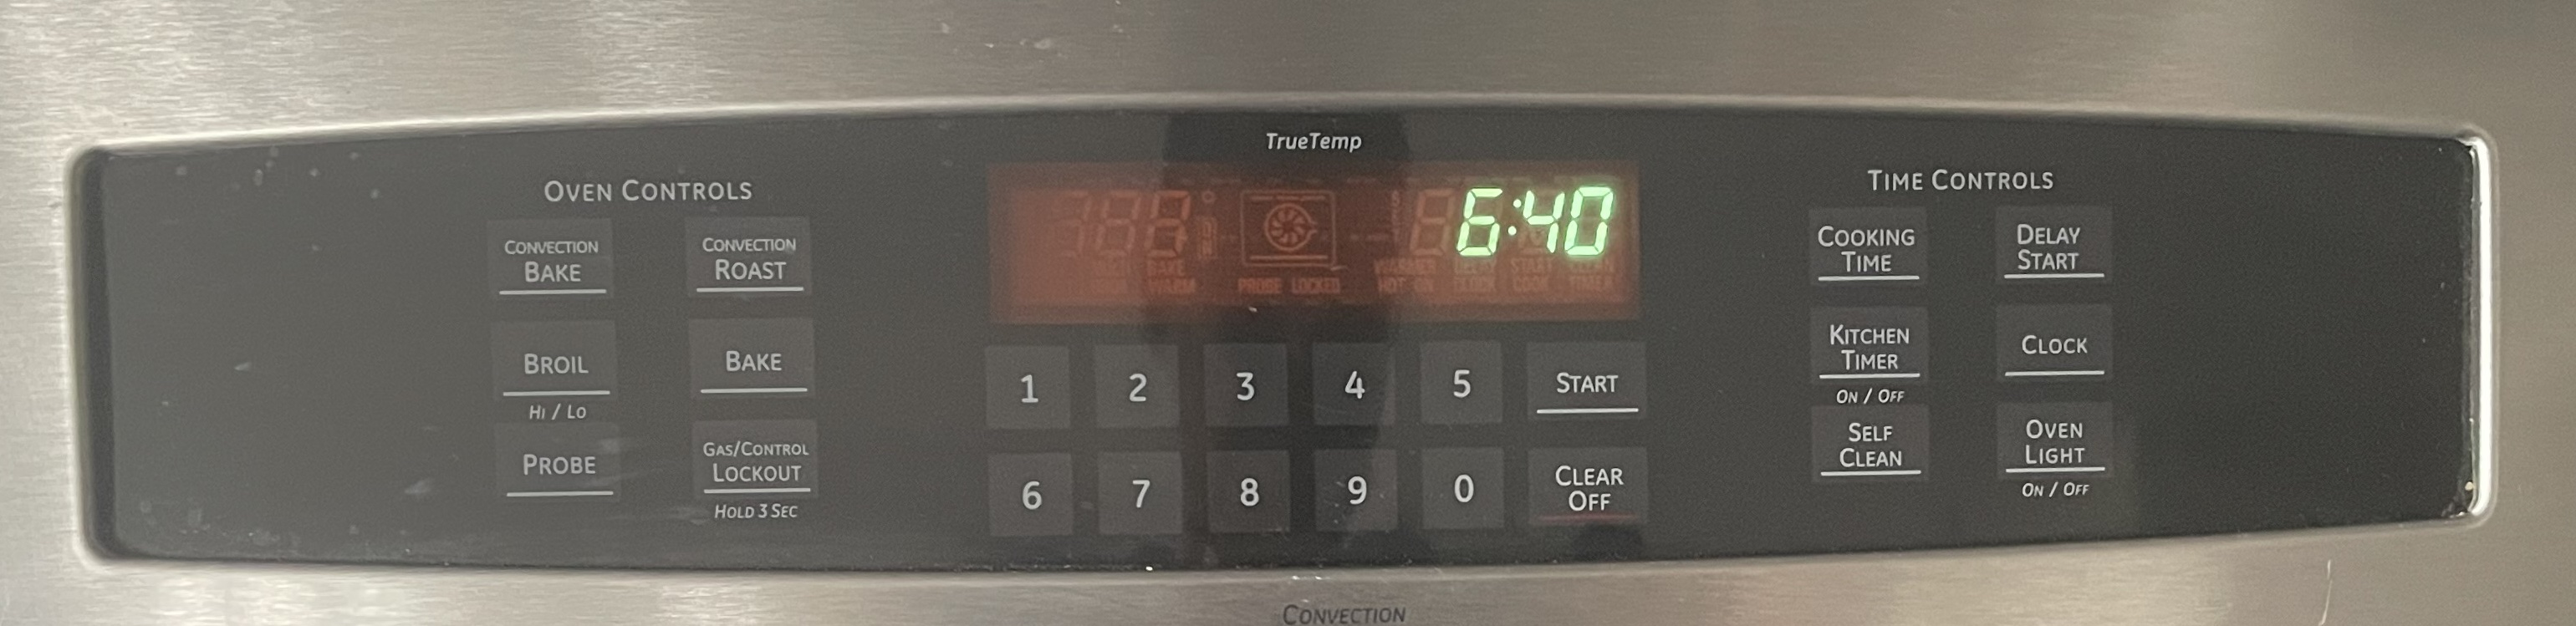 Oven control panel